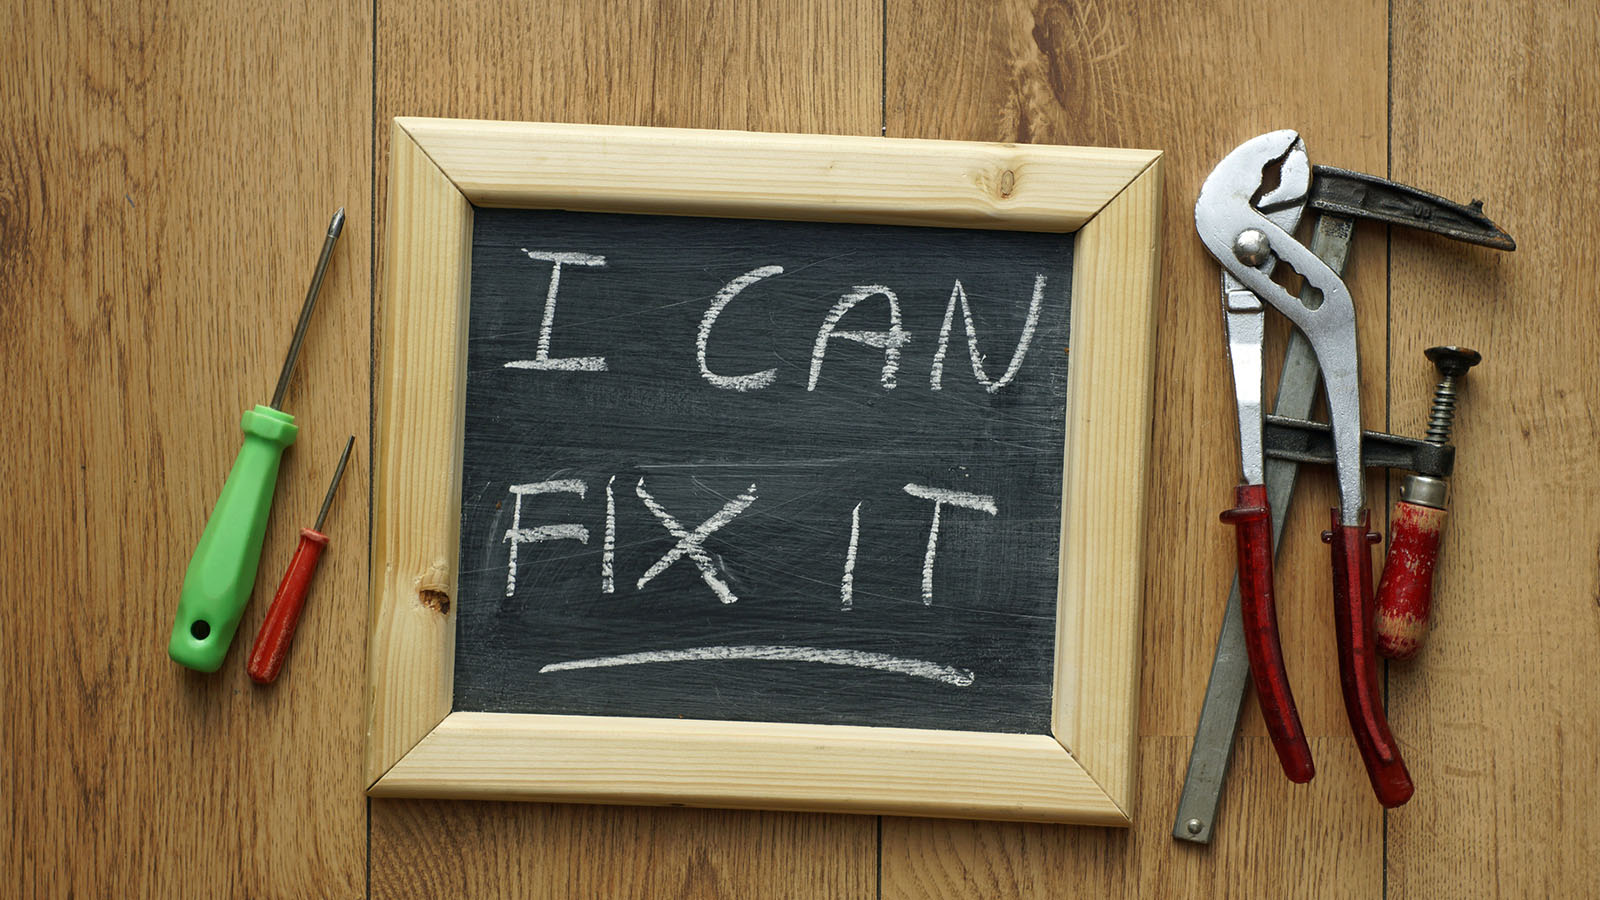 Can you fix my. I can Fix. I can Fix it. School do it yourself. Try it yourself.